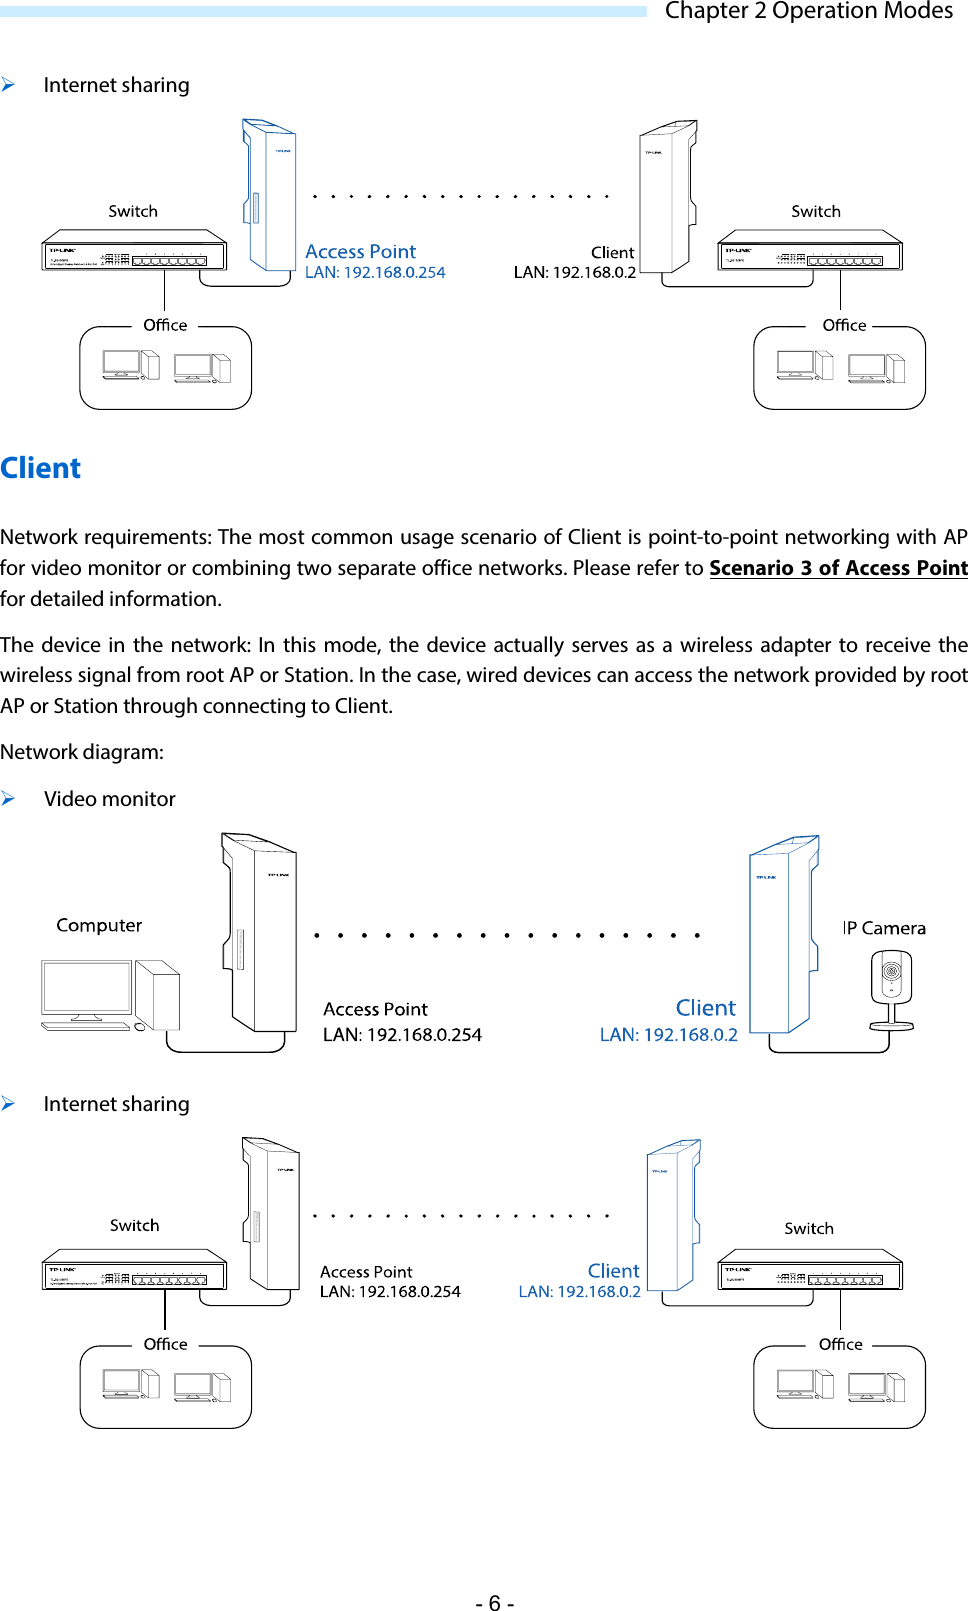  Chapter 2 Operation Modes  Internet sharing  Client Network requirements: The most common usage scenario of Client is point-to-point networking with AP for video monitor or combining two separate office networks. Please refer to Scenario 3 of Access Point for detailed information. The device in the network: In this mode, the device actually serves as a wireless adapter to receive the wireless signal from root AP or Station. In the case, wired devices can access the network provided by root AP or Station through connecting to Client. Network diagram:  Video monitor   Internet sharing  - 6 - 